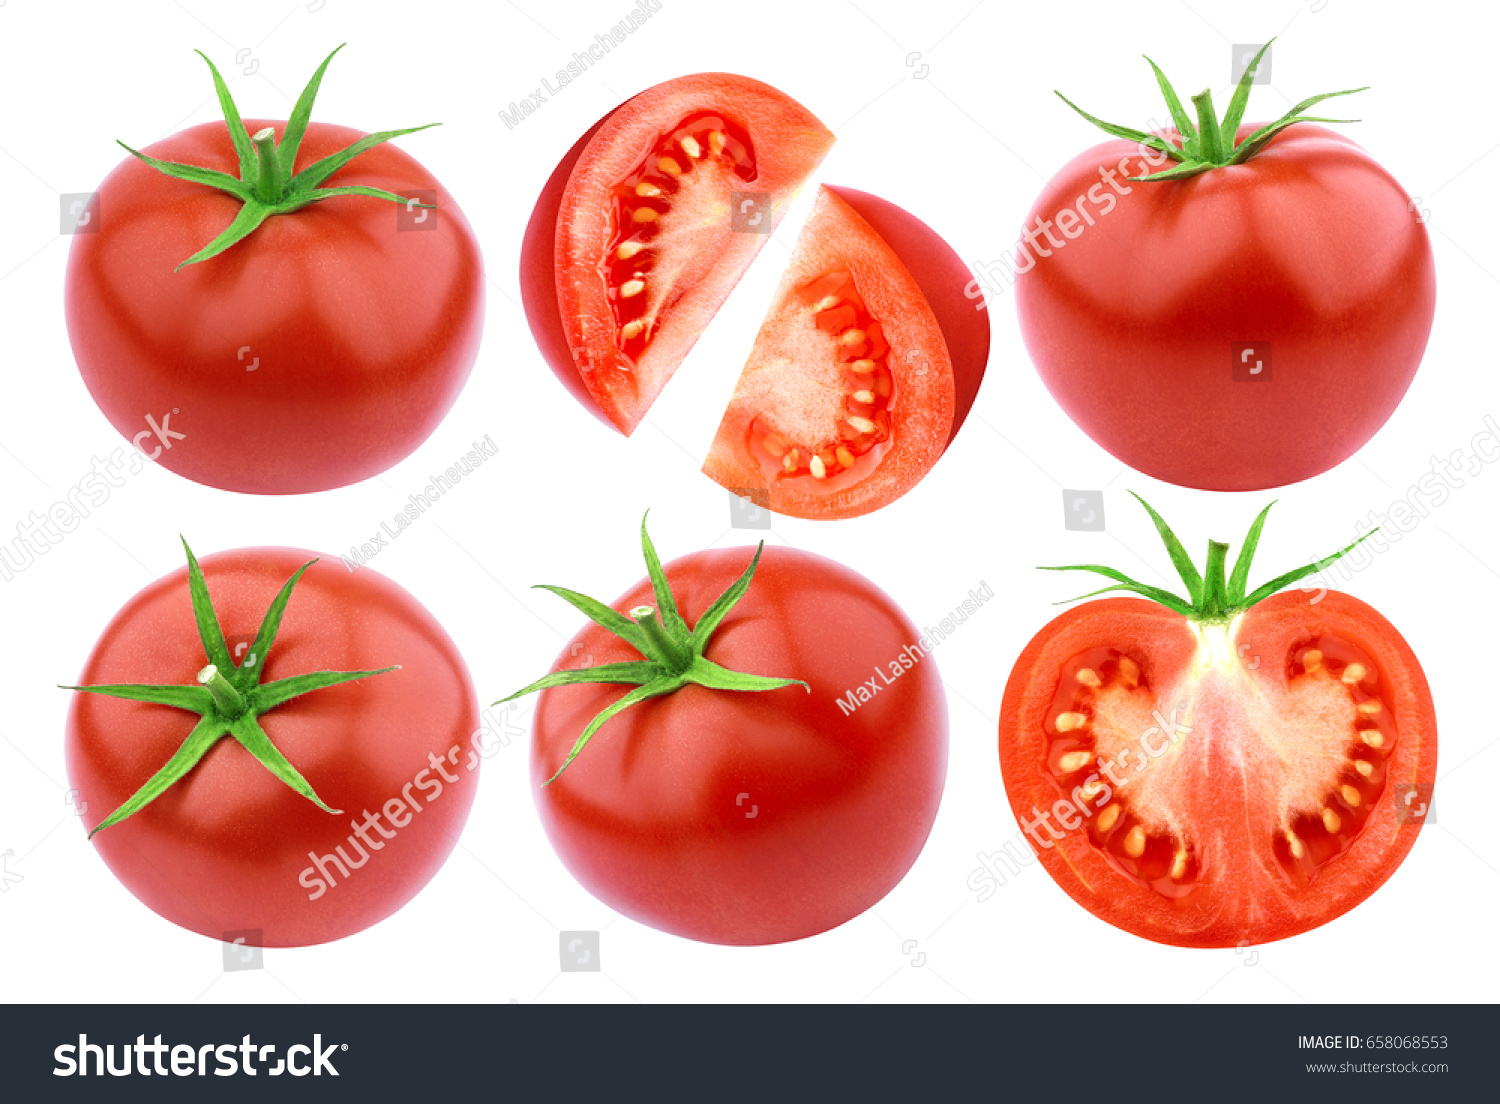 Tomatoes isolated. Fresh cut tomato set isolated on white background with clipping path #658068553